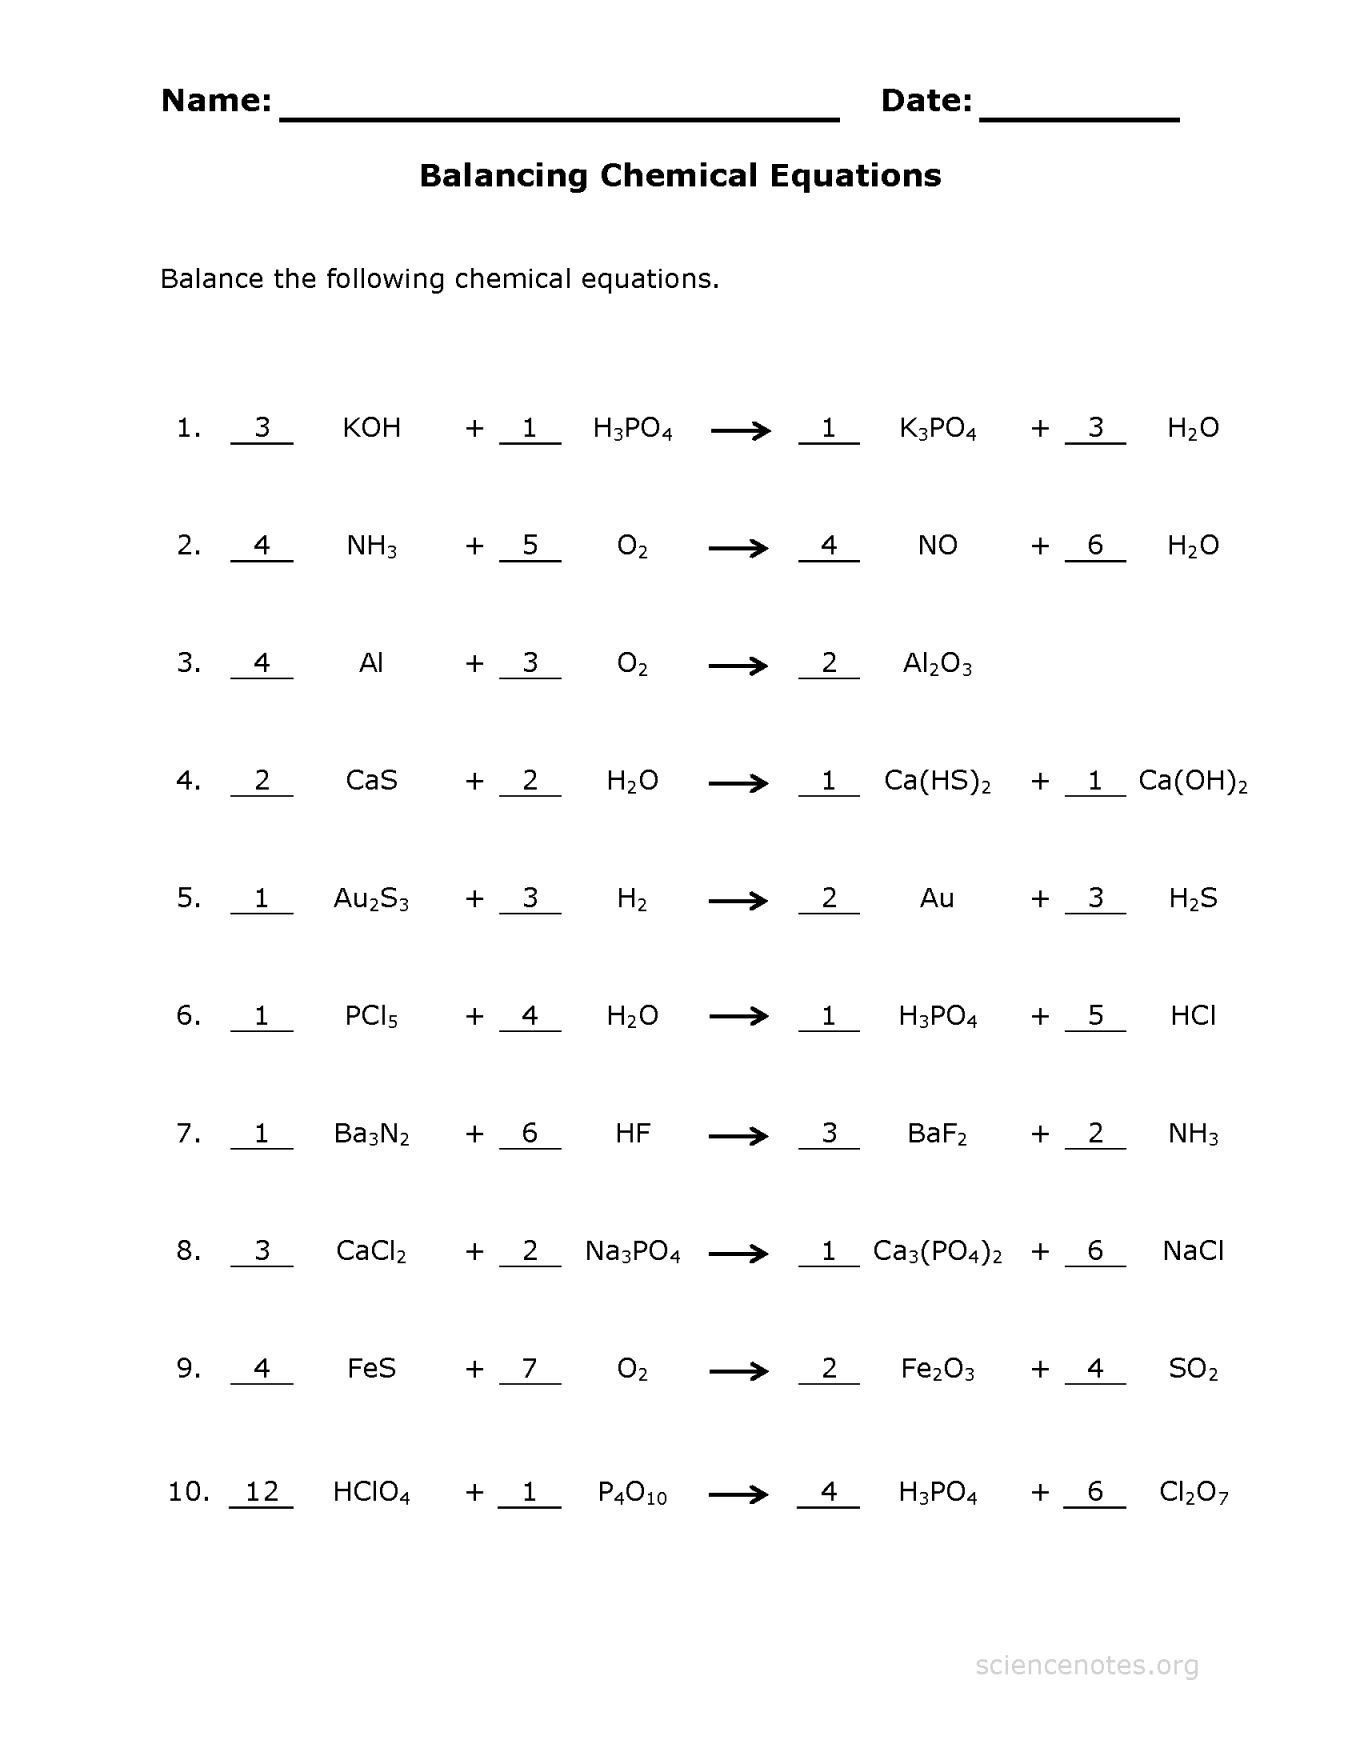 Solving Multi Step Equations With Distributive Property